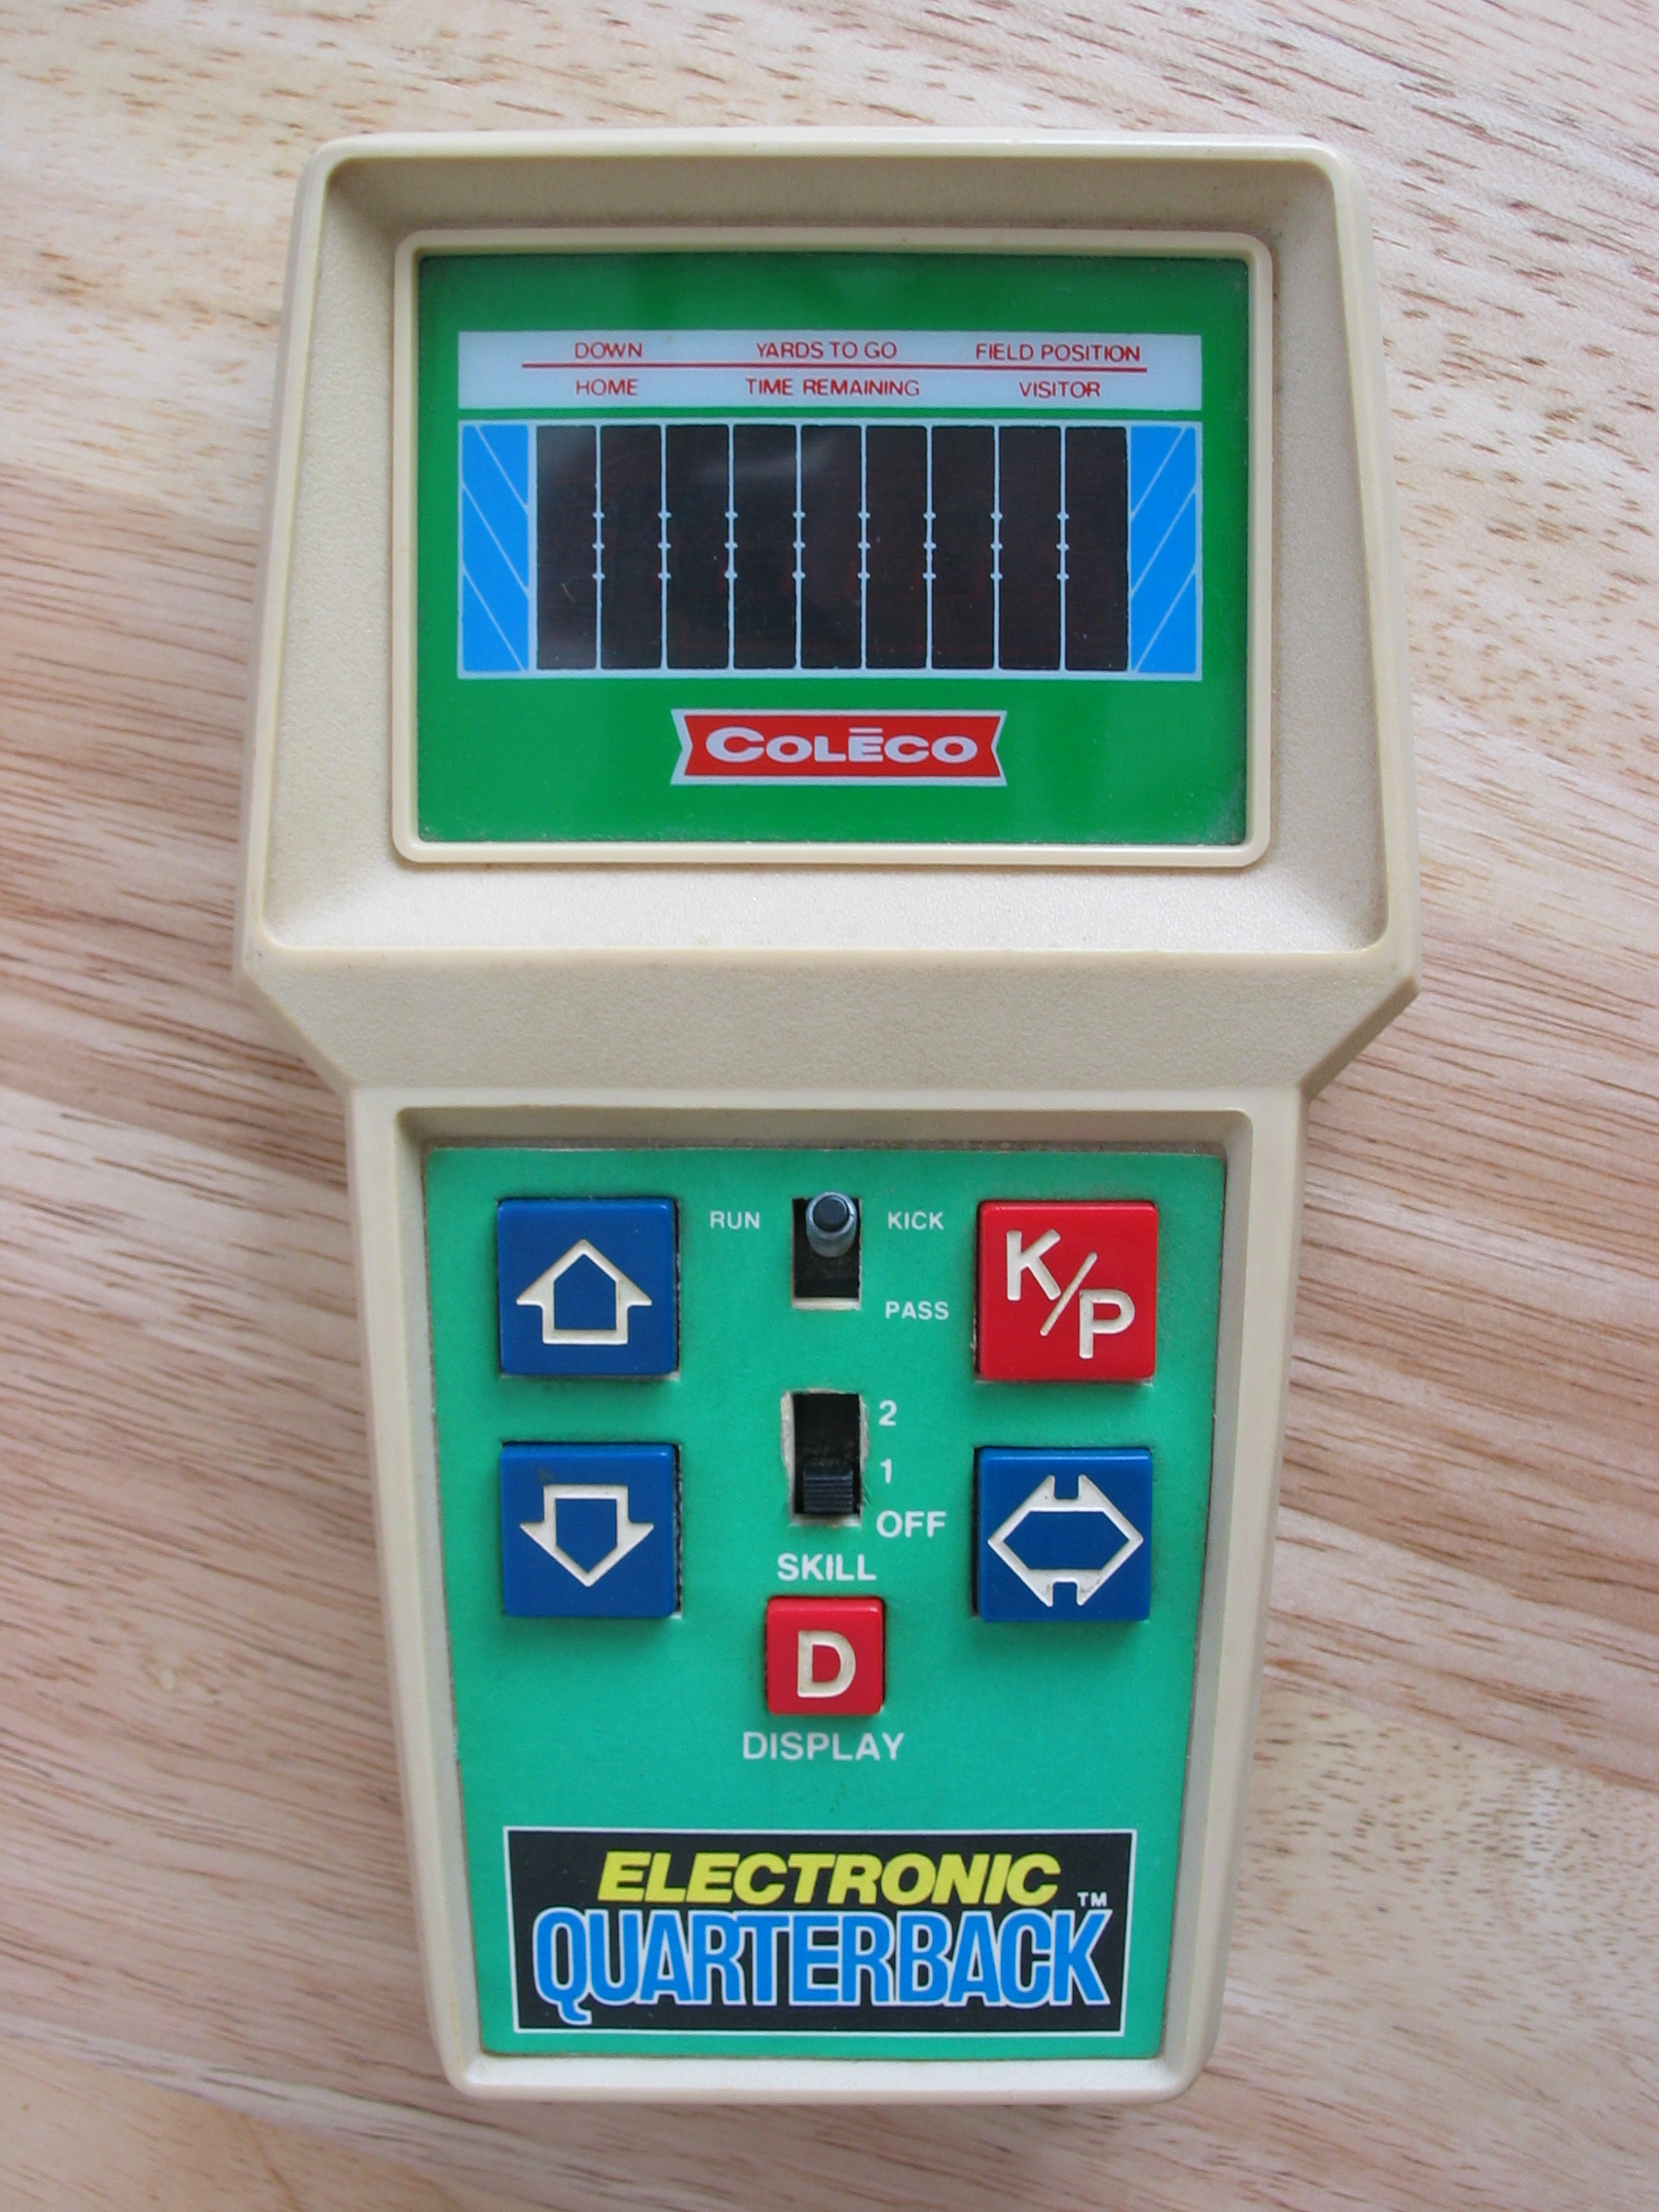 Coleco Electronic Quarterback: One of our favorite holiday gifts from our own childhoods.